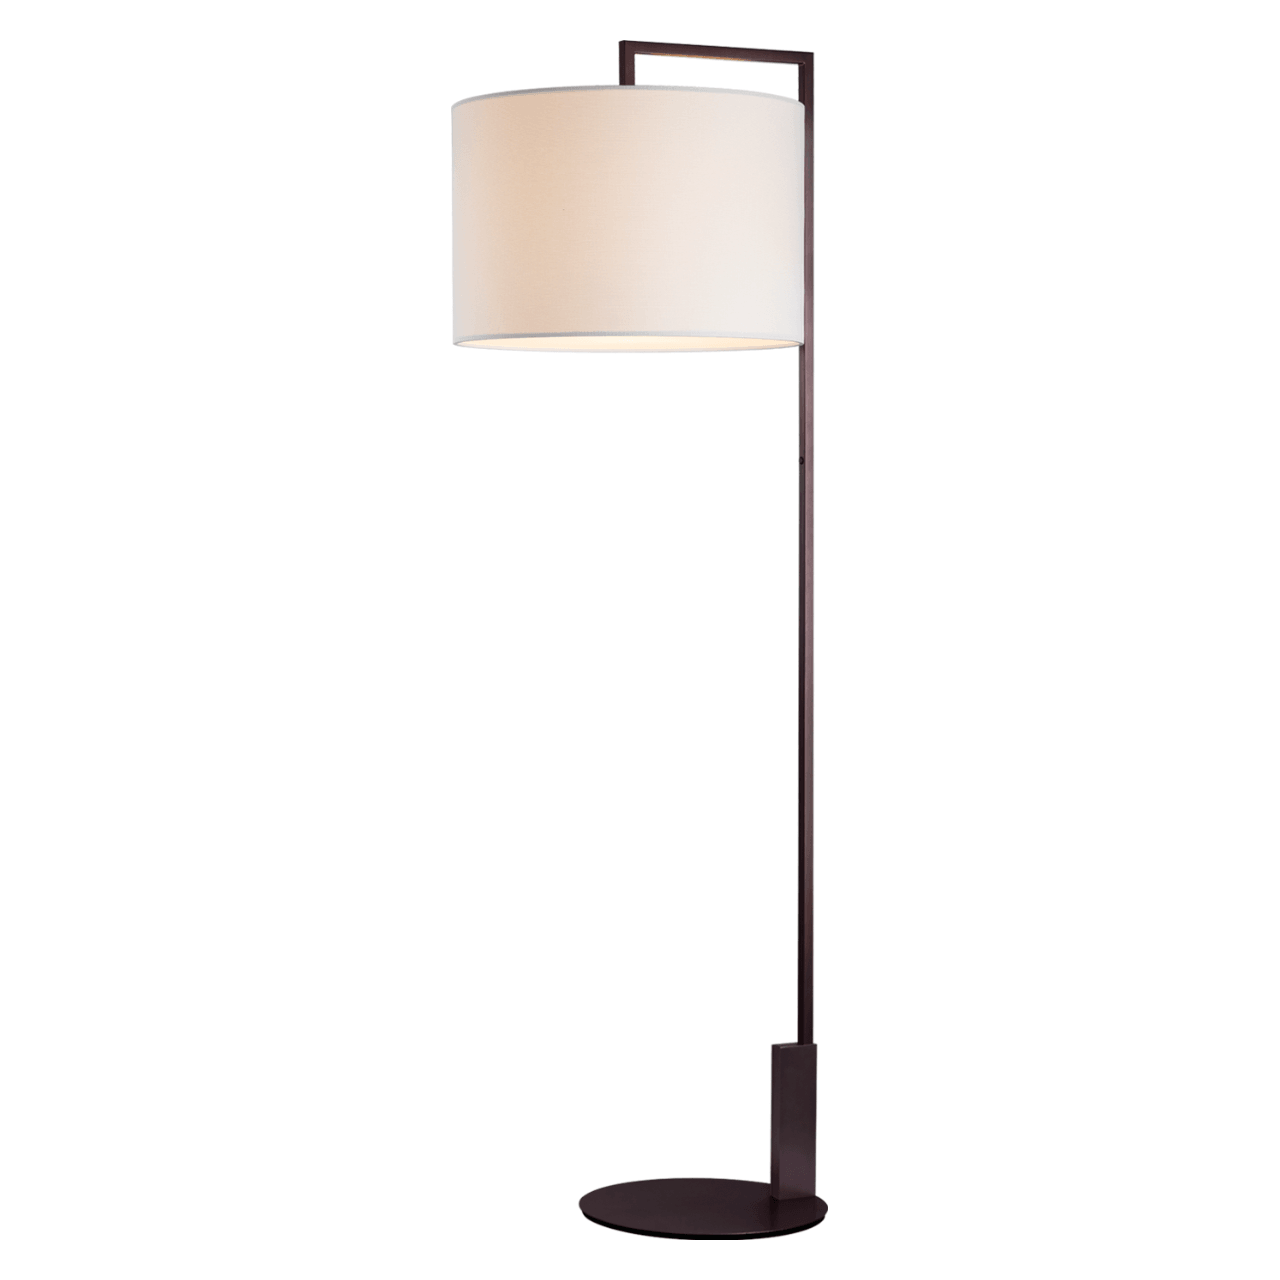 Pageone - Waldorf. Floor Lamp - Hbdepot